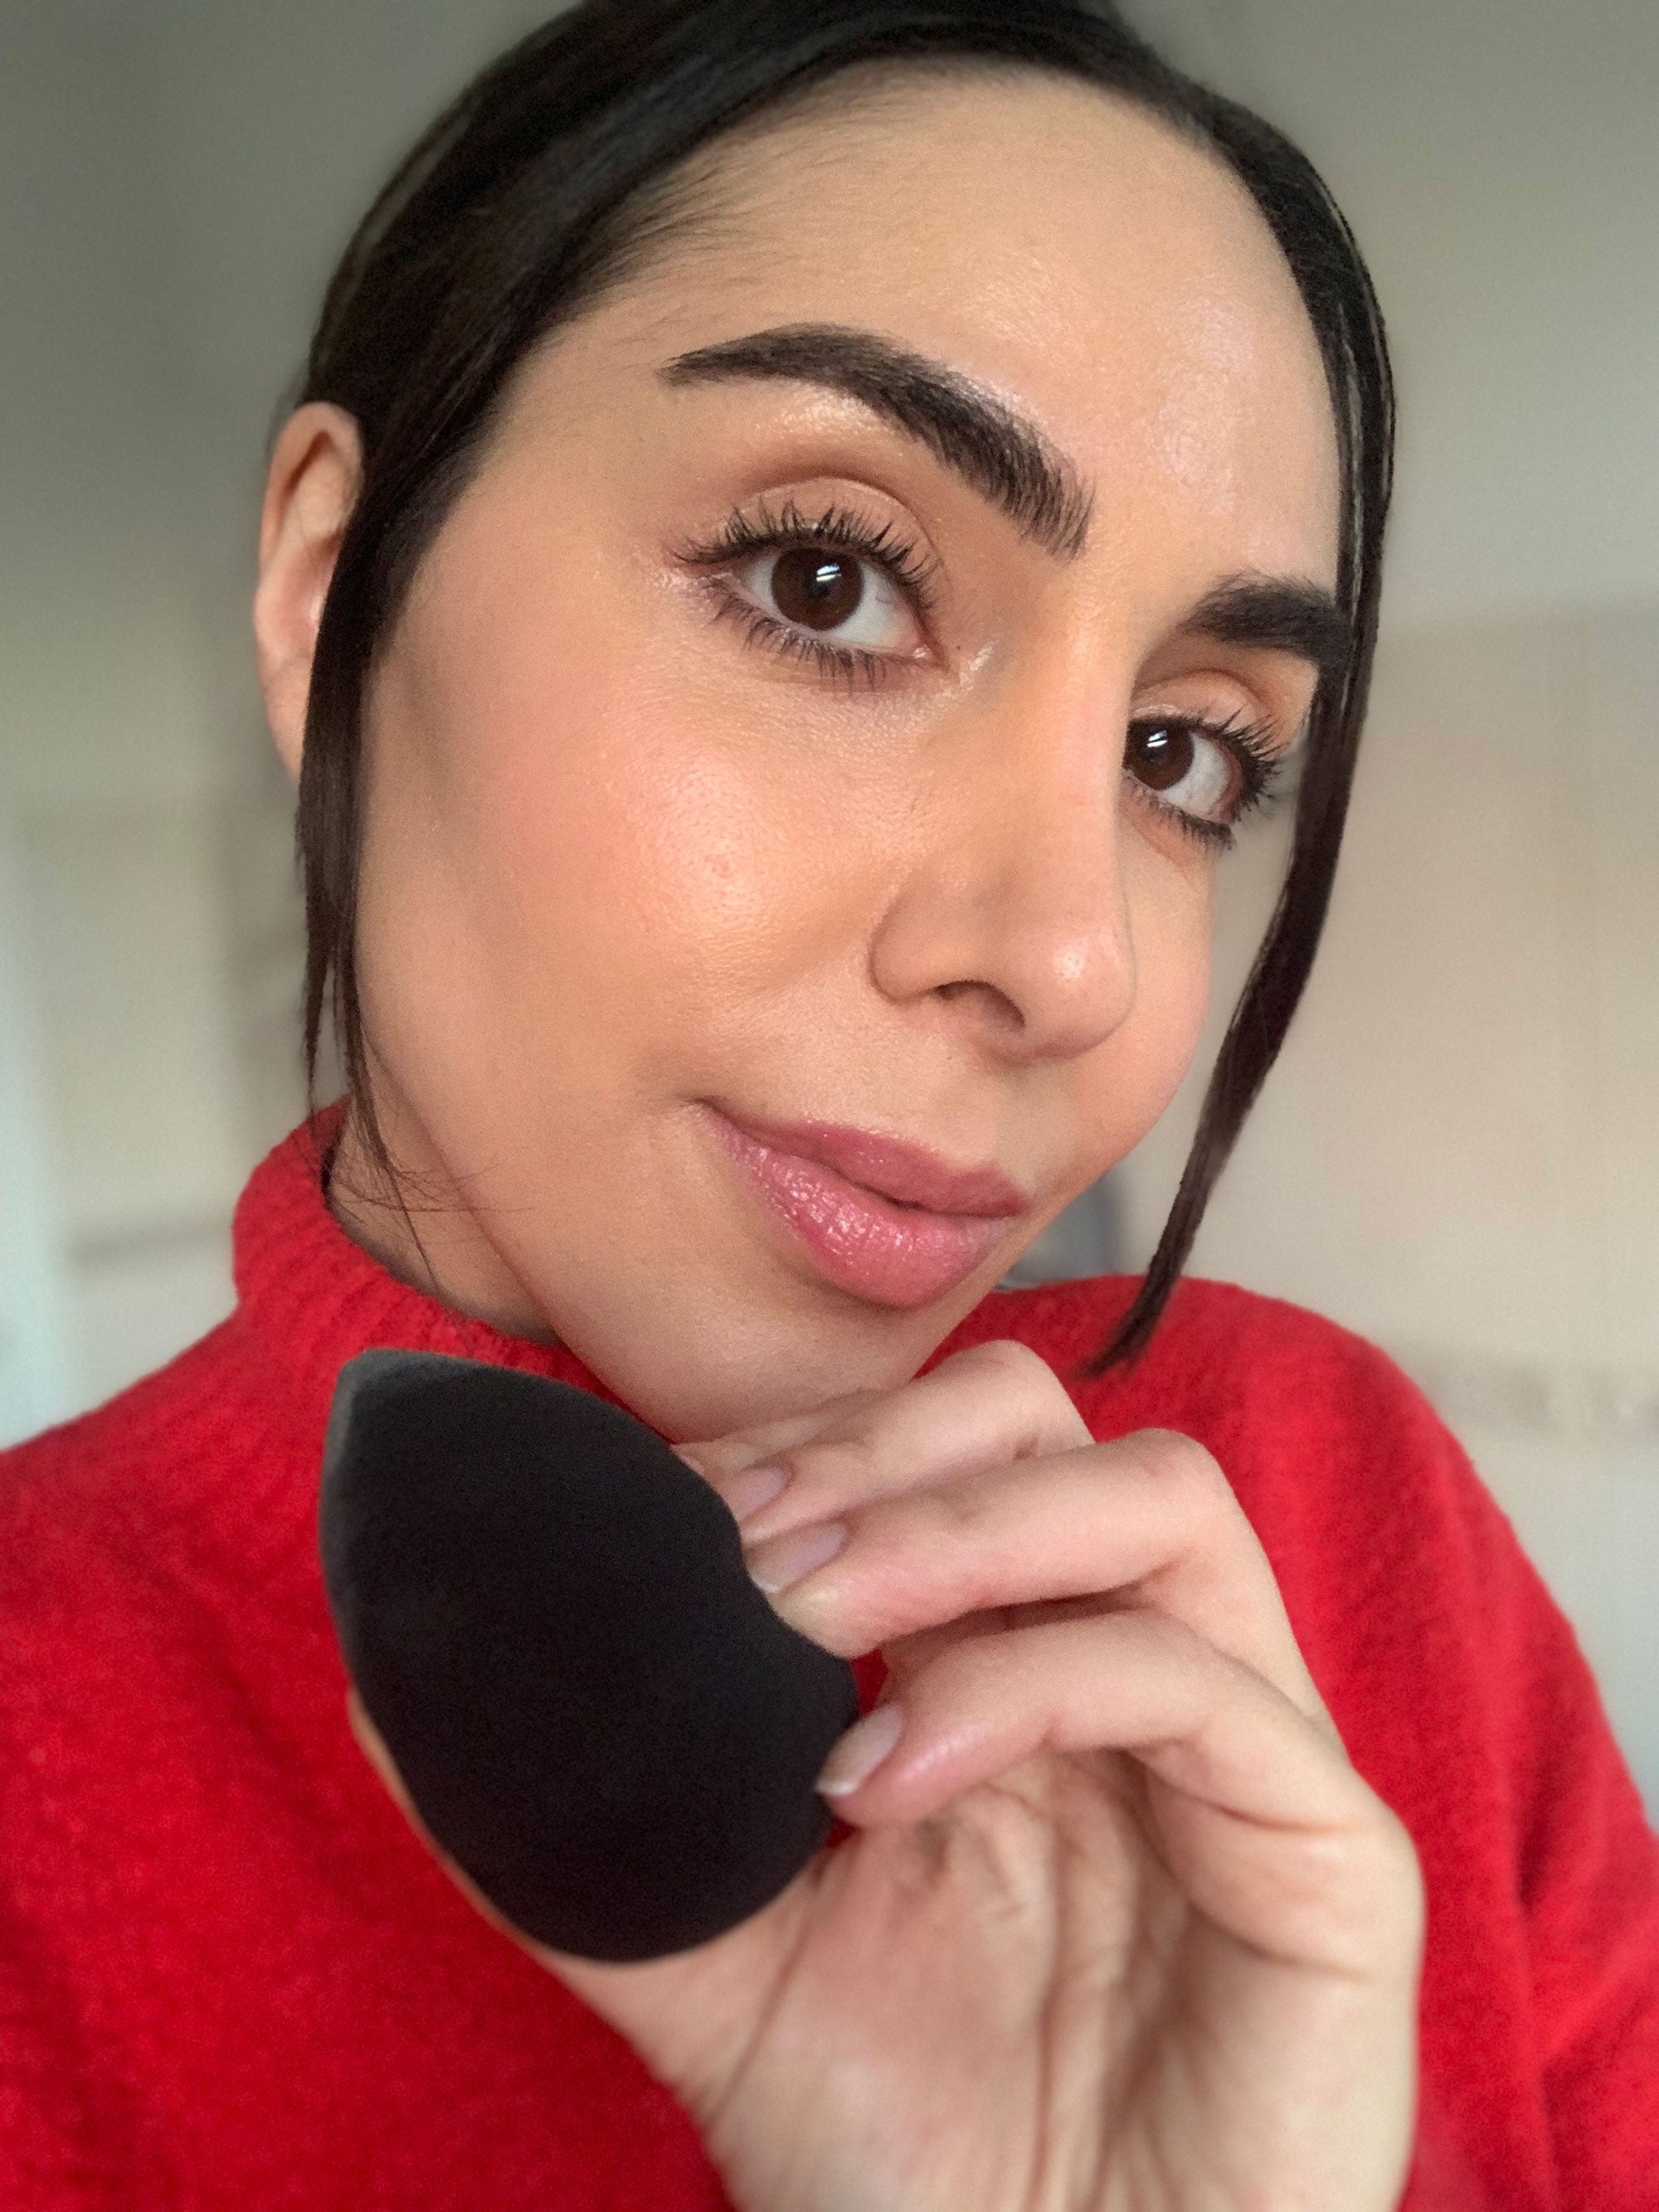 The Frozen Beauty Blender Hack Made My Pores Disappear